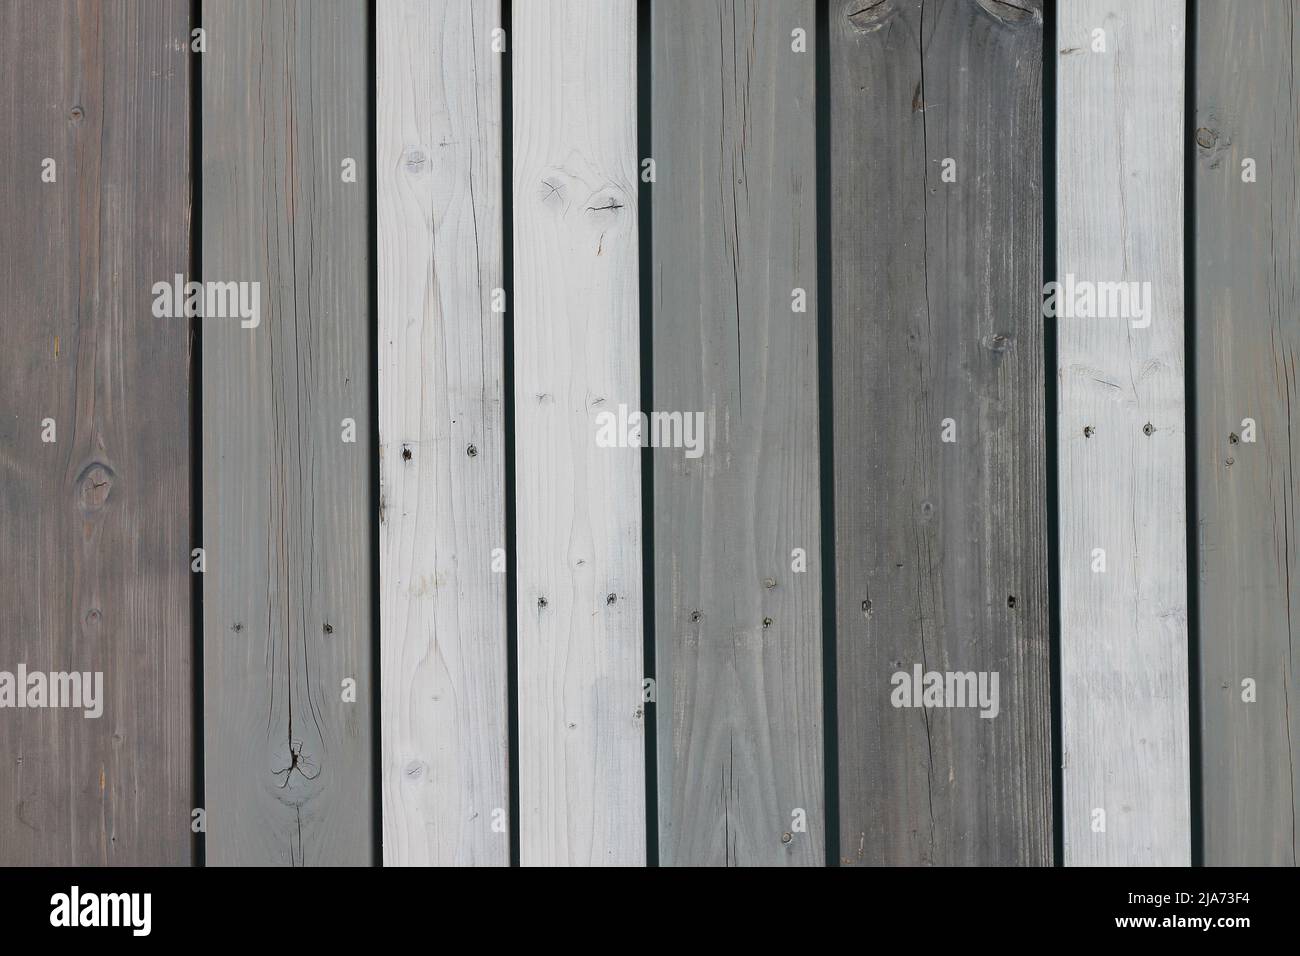 Striped wooden planks texture. Natural planks patterns. Stock Photo